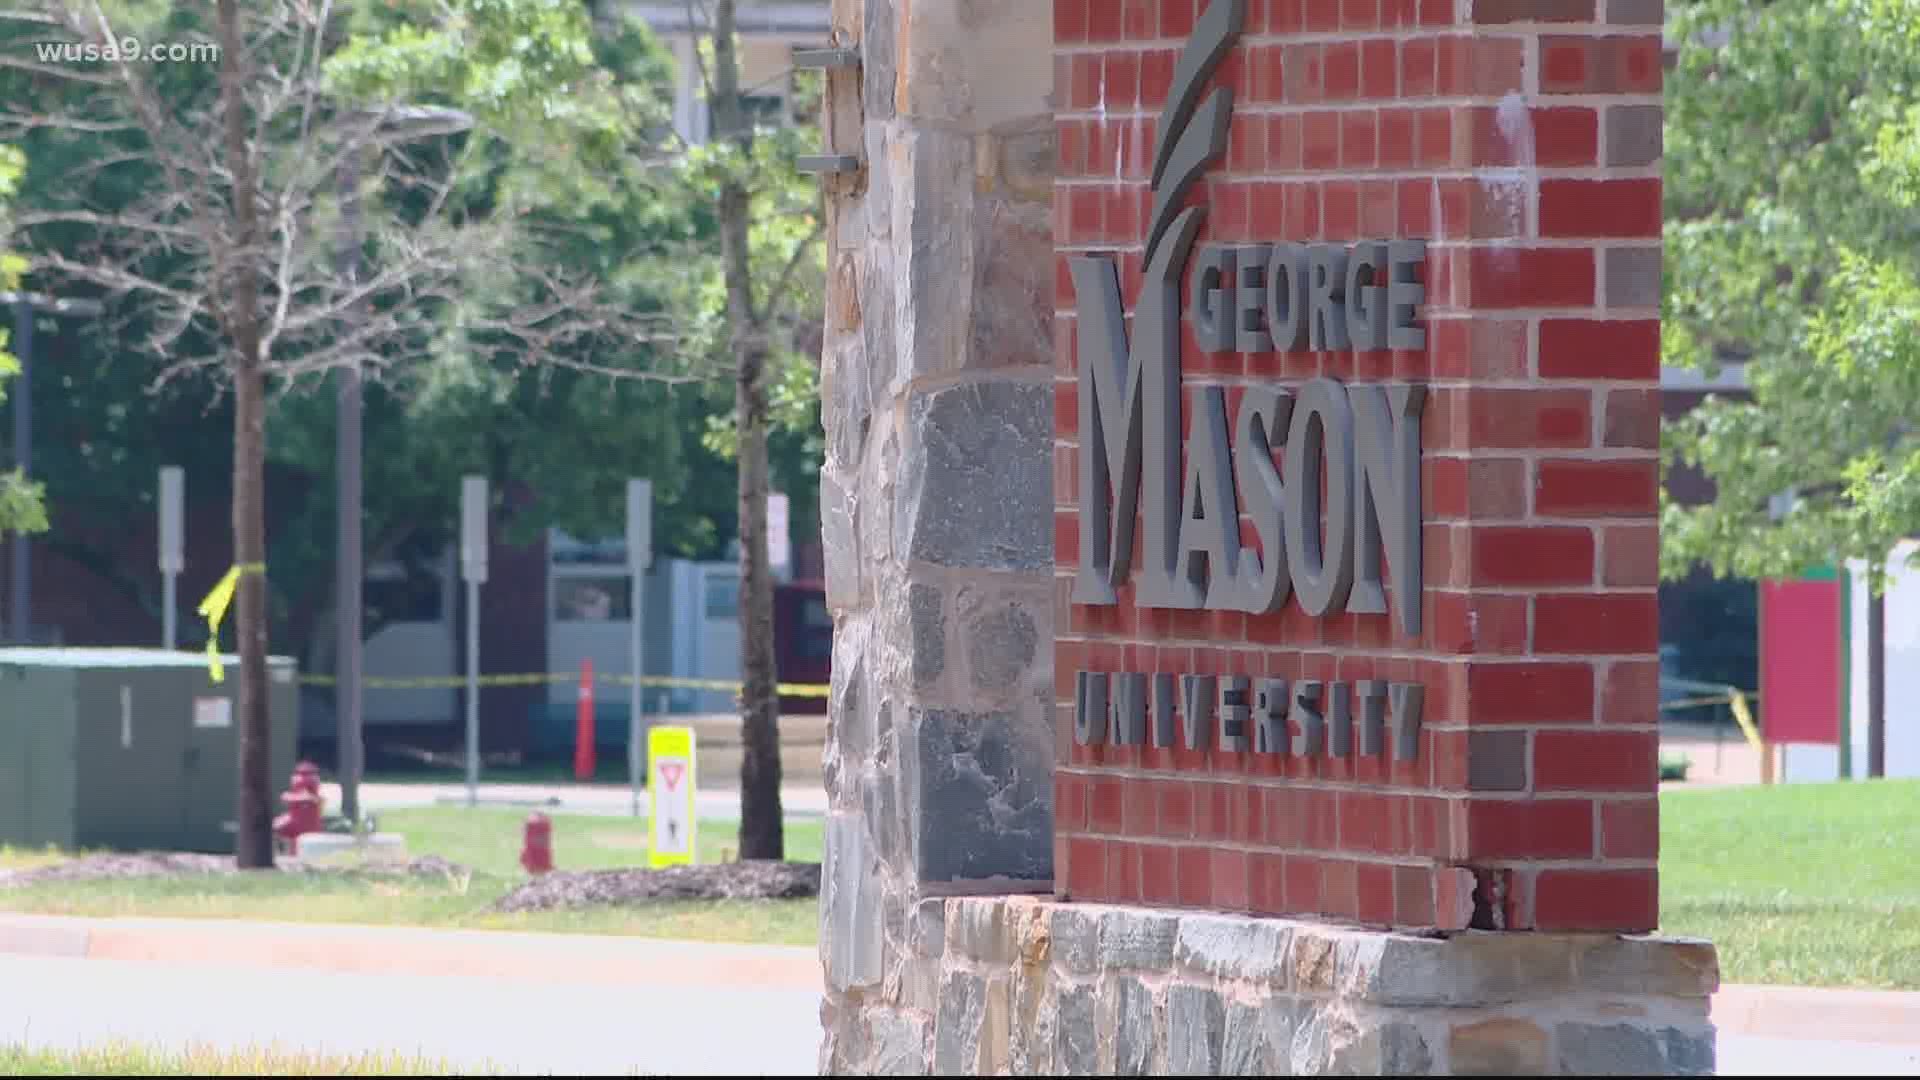 The students who tested positive at GMU will need to recover before coming to campus.